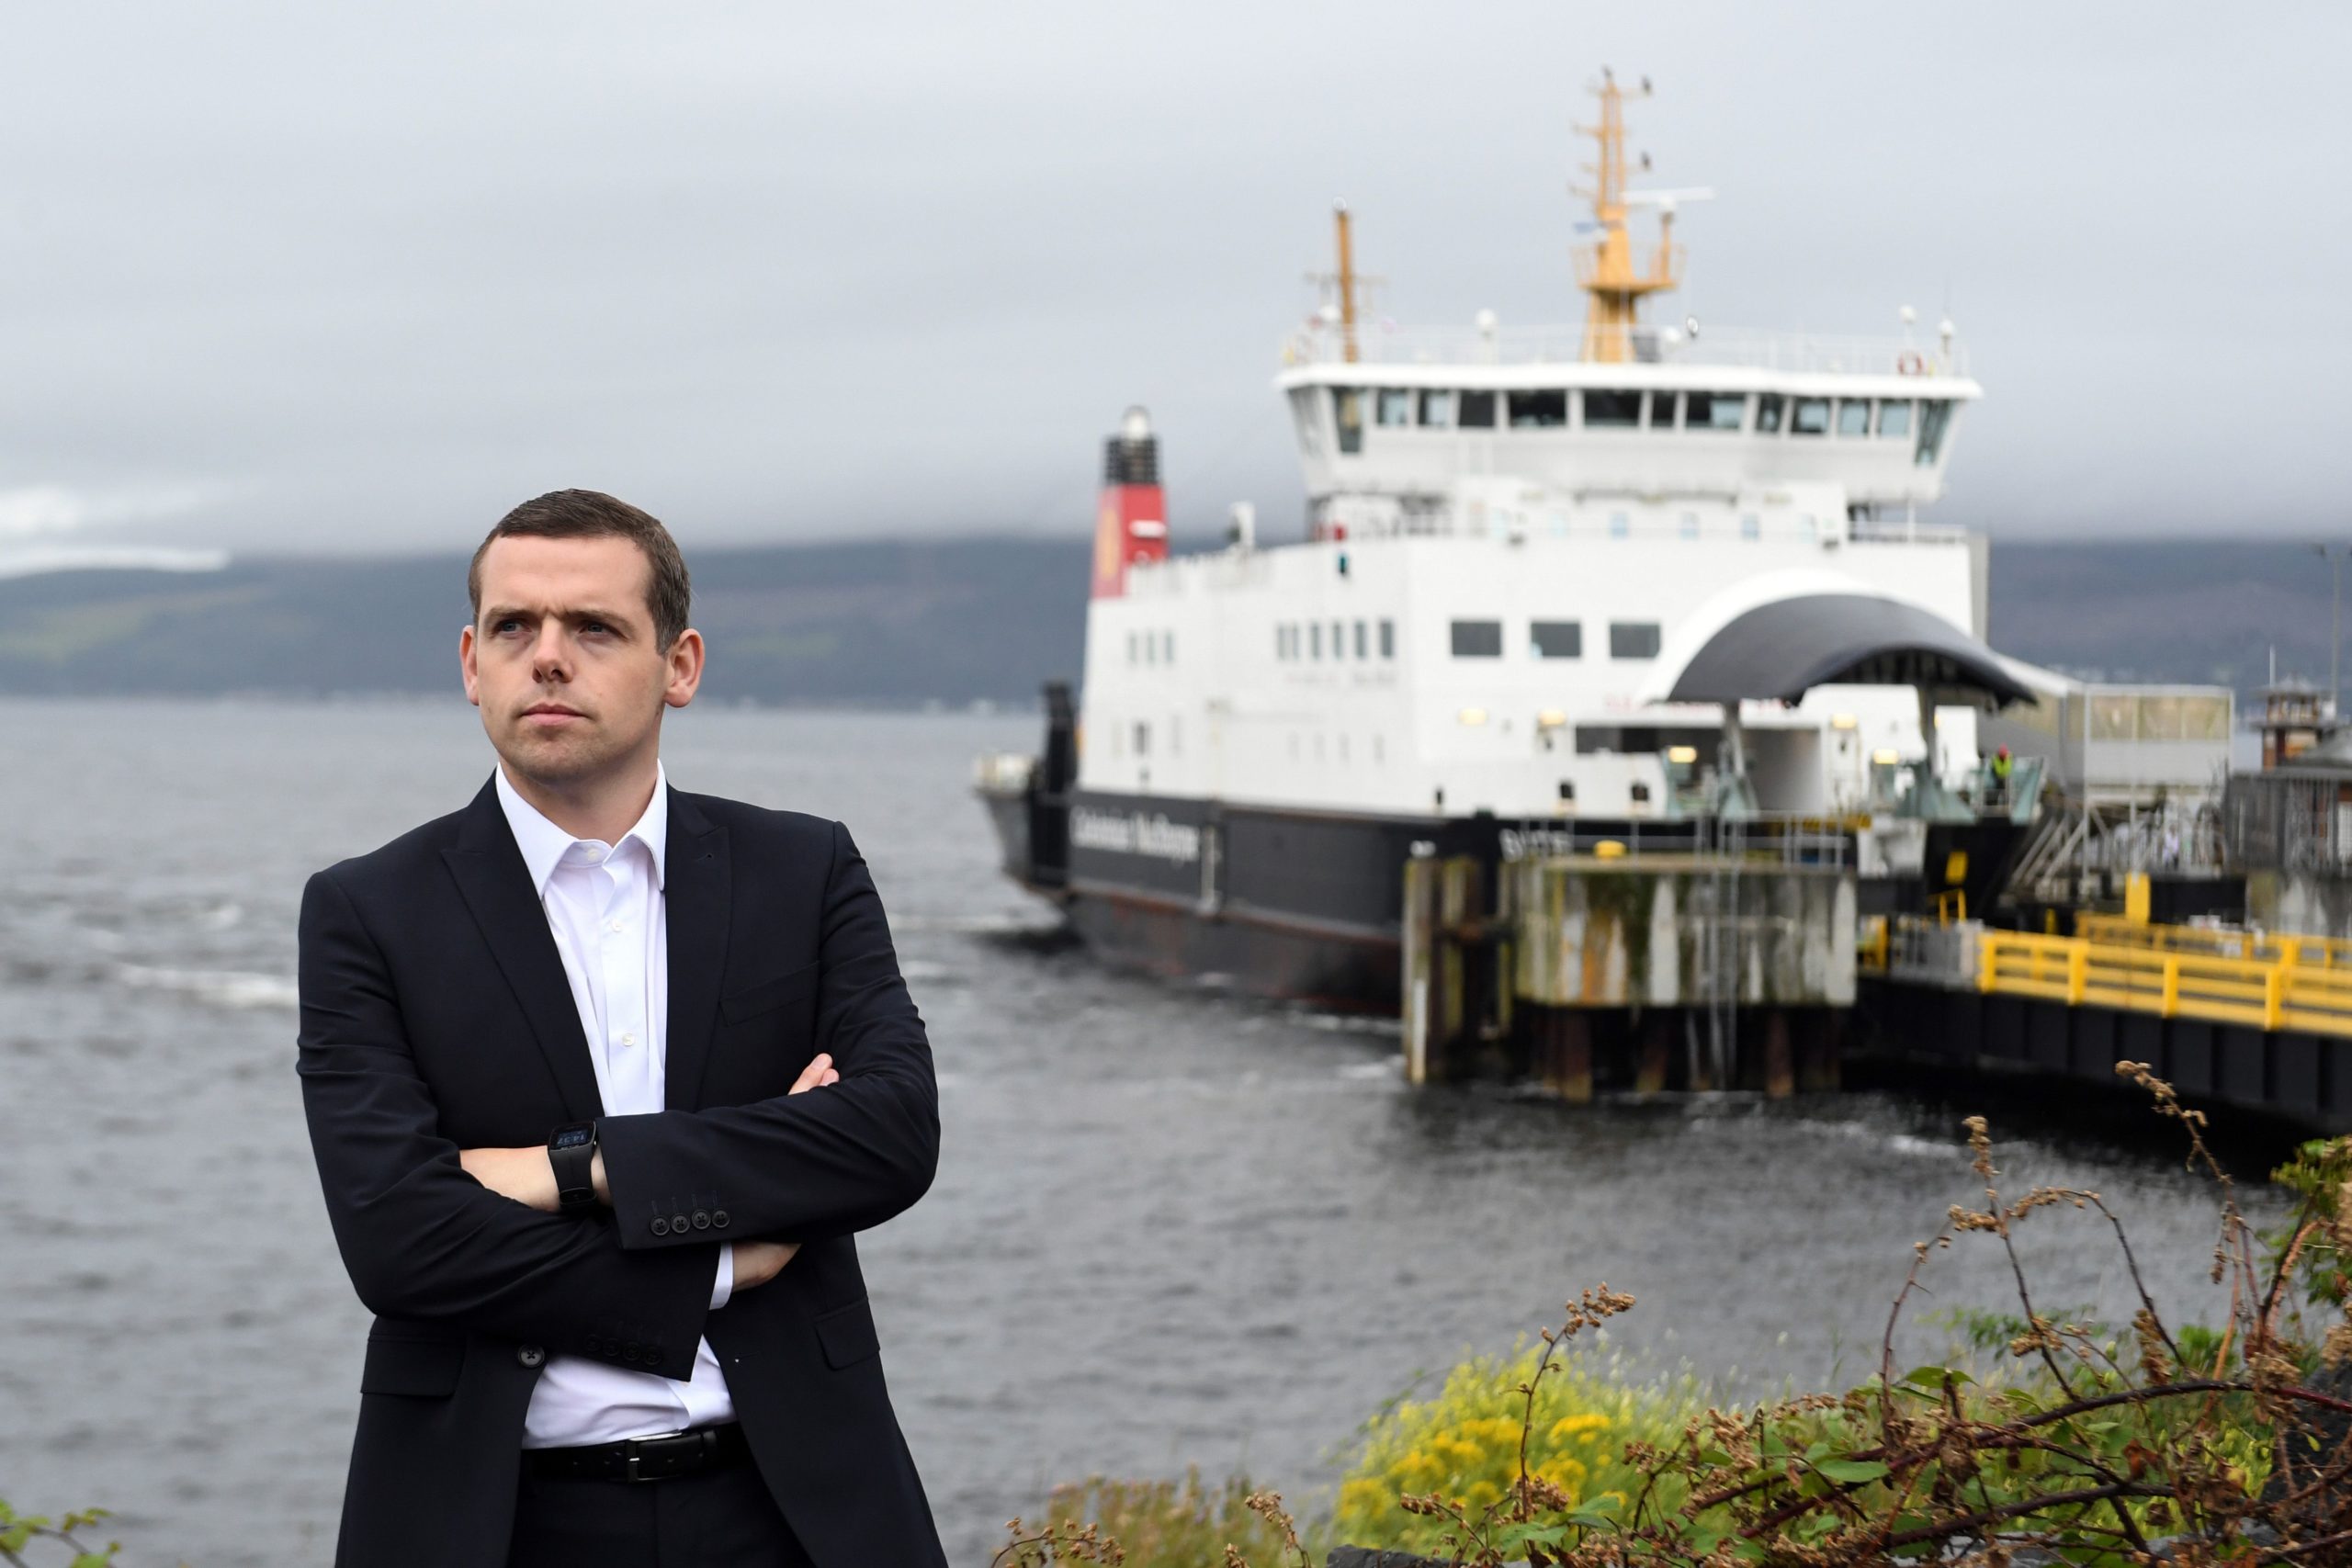 Douglas Ross, the new leader of the Scottish Conservative Party